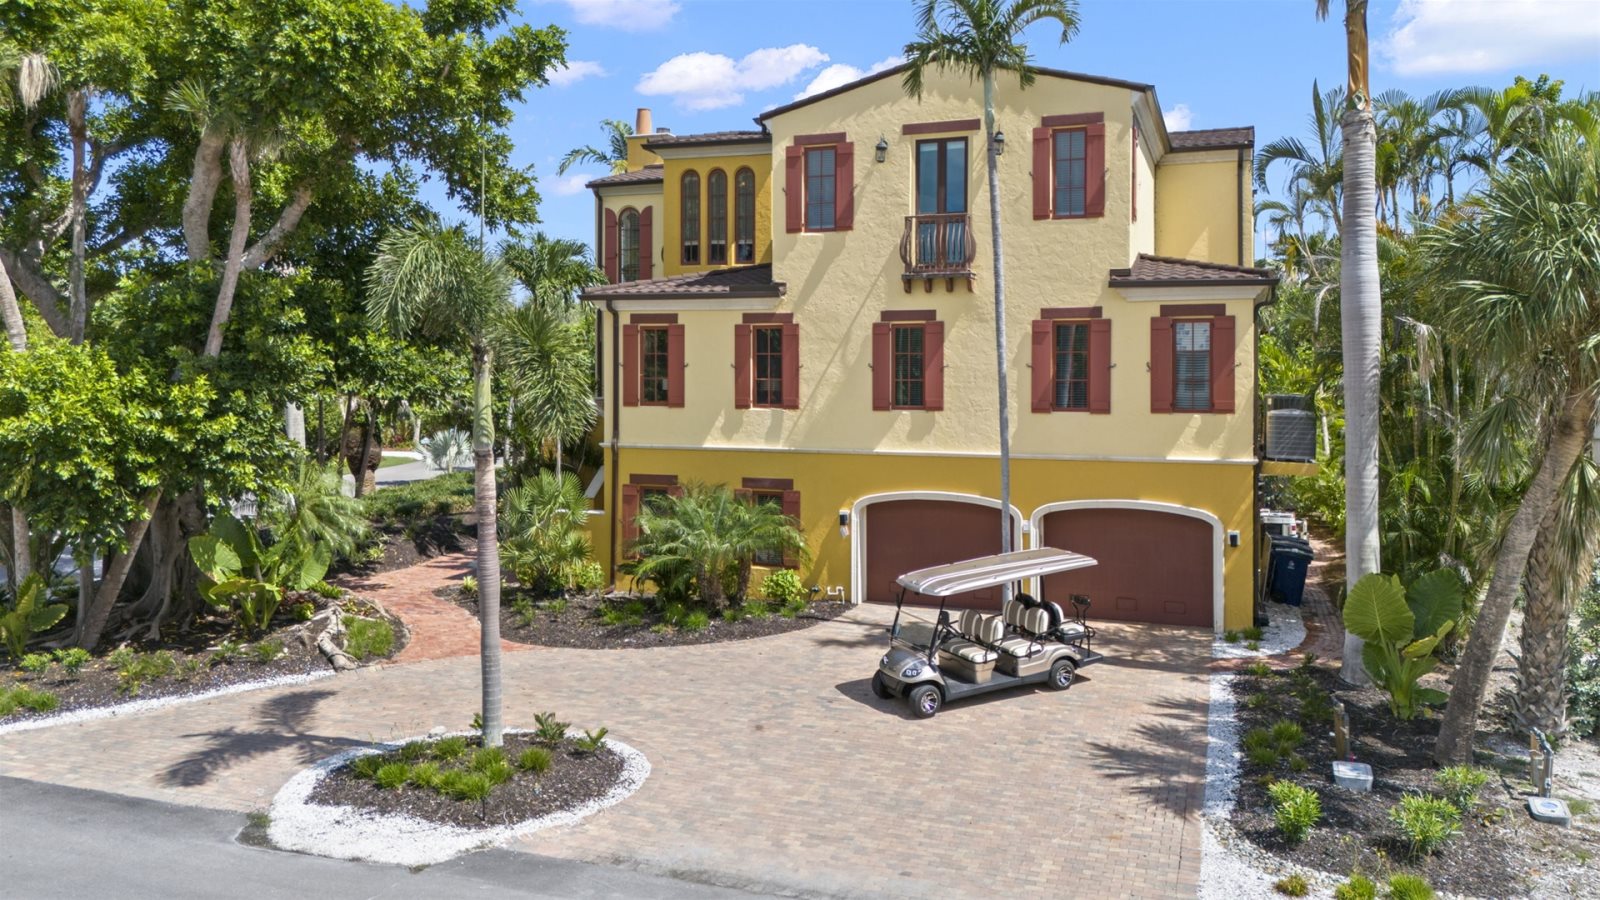 Stay A-Wiles, Private Home on Captiva Island, Florida